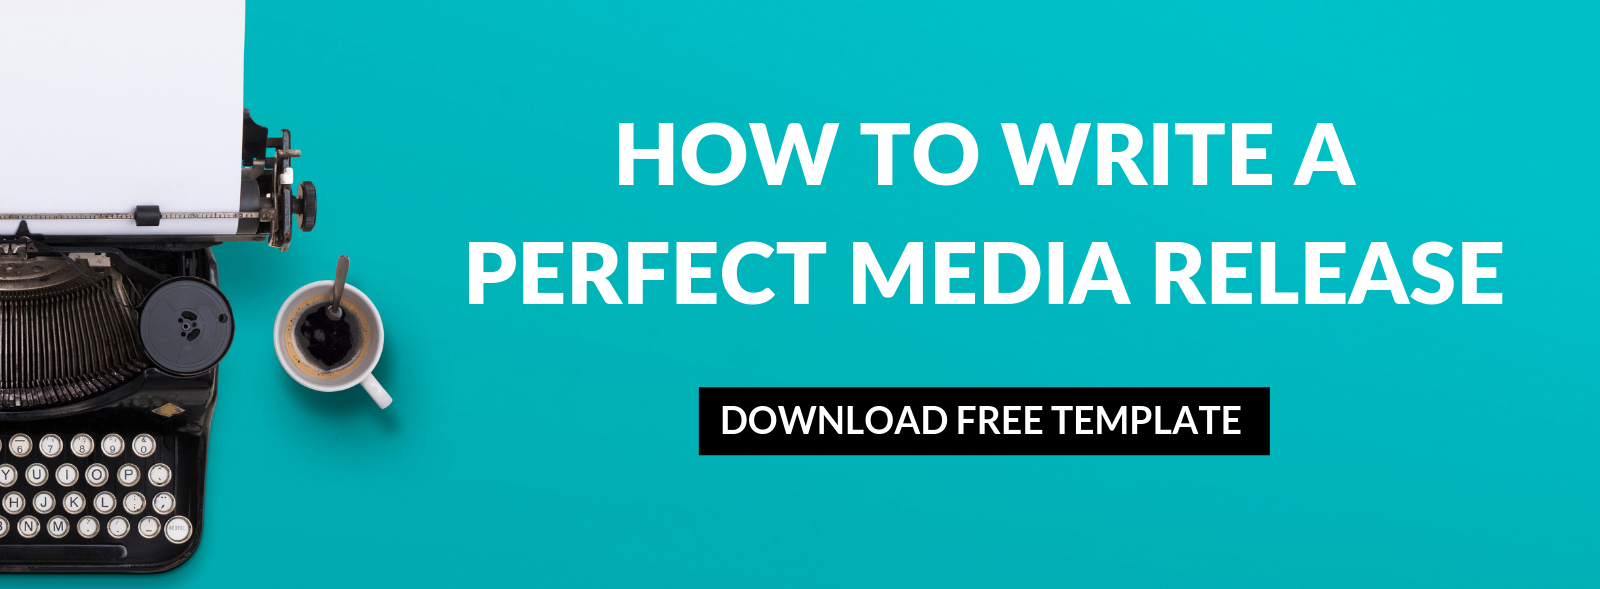 How to write a perfect media release